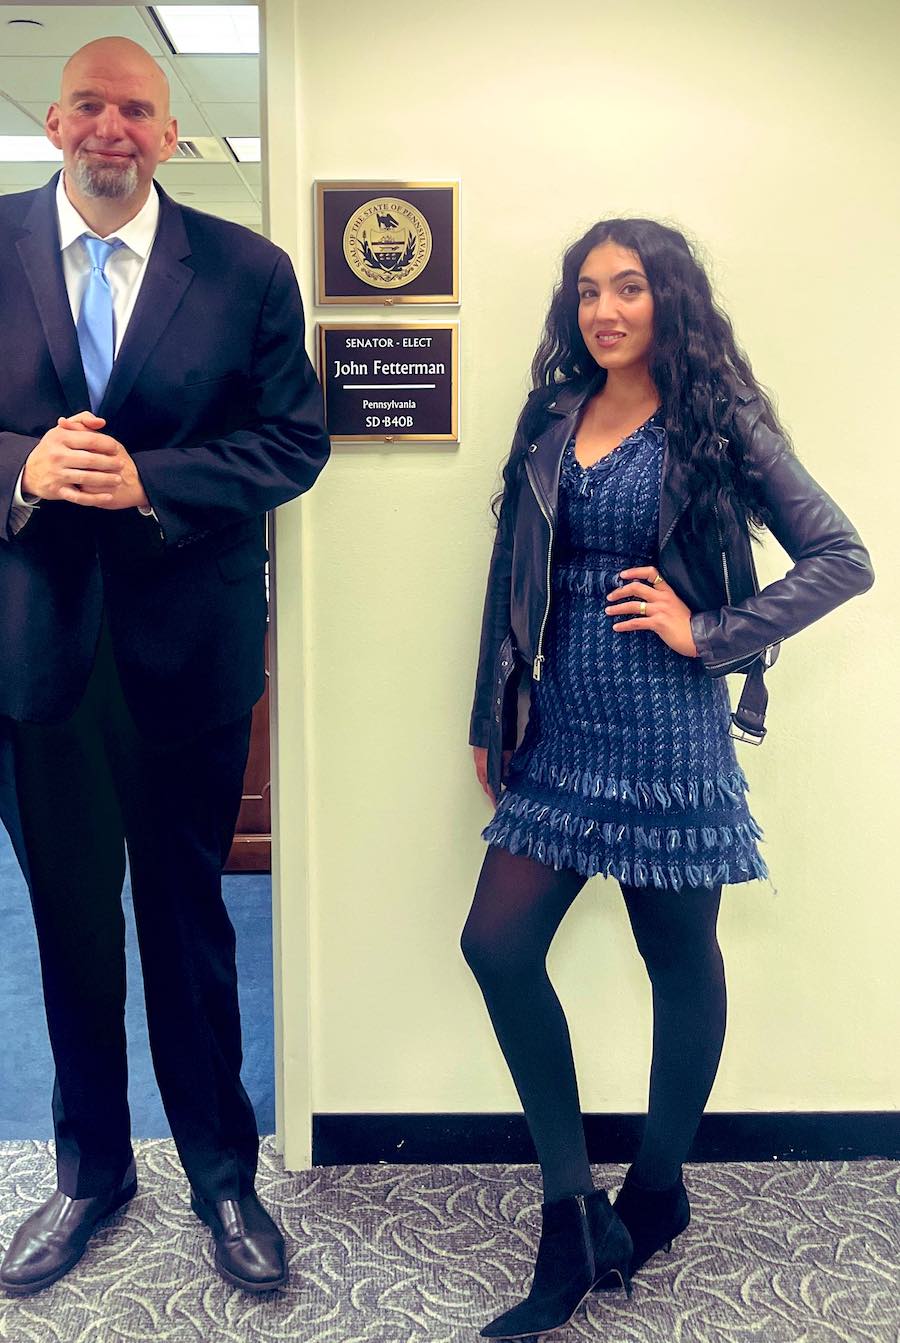 john fetterman and gisele fetterman, who is wearing a $12 thrift store dress on her first day at the United States Capitol